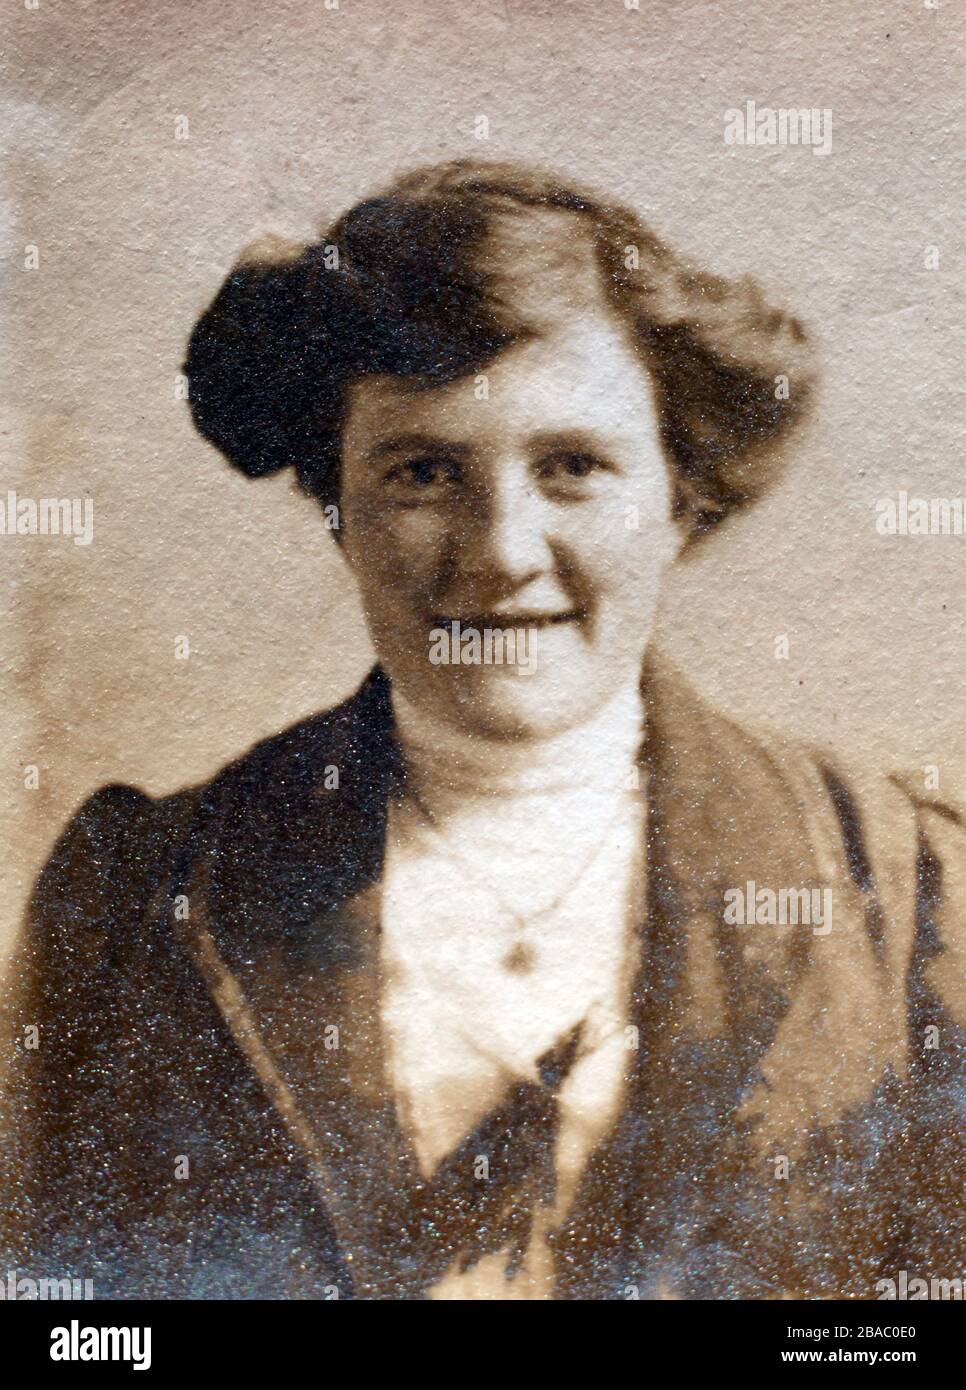 Archive portrait circa 1910 of a young Edwardian woman - printed on textured paper. Stock Photo